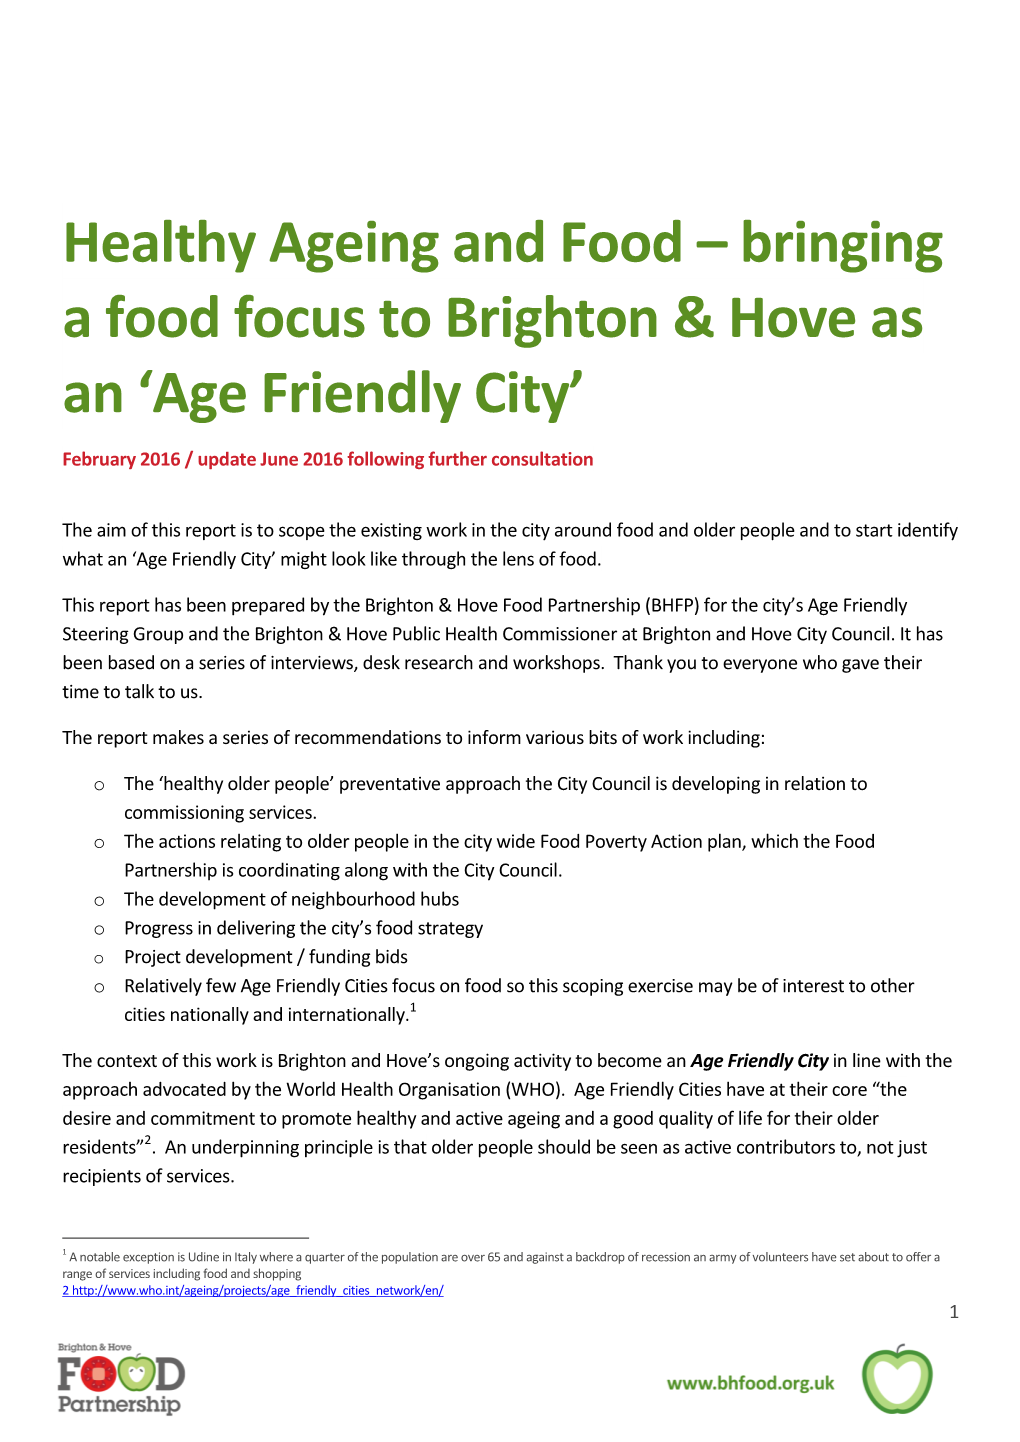 Healthy Ageing and Food – Bringing a Food Focus to Brighton & Hove As an ‘Age Friendly City’